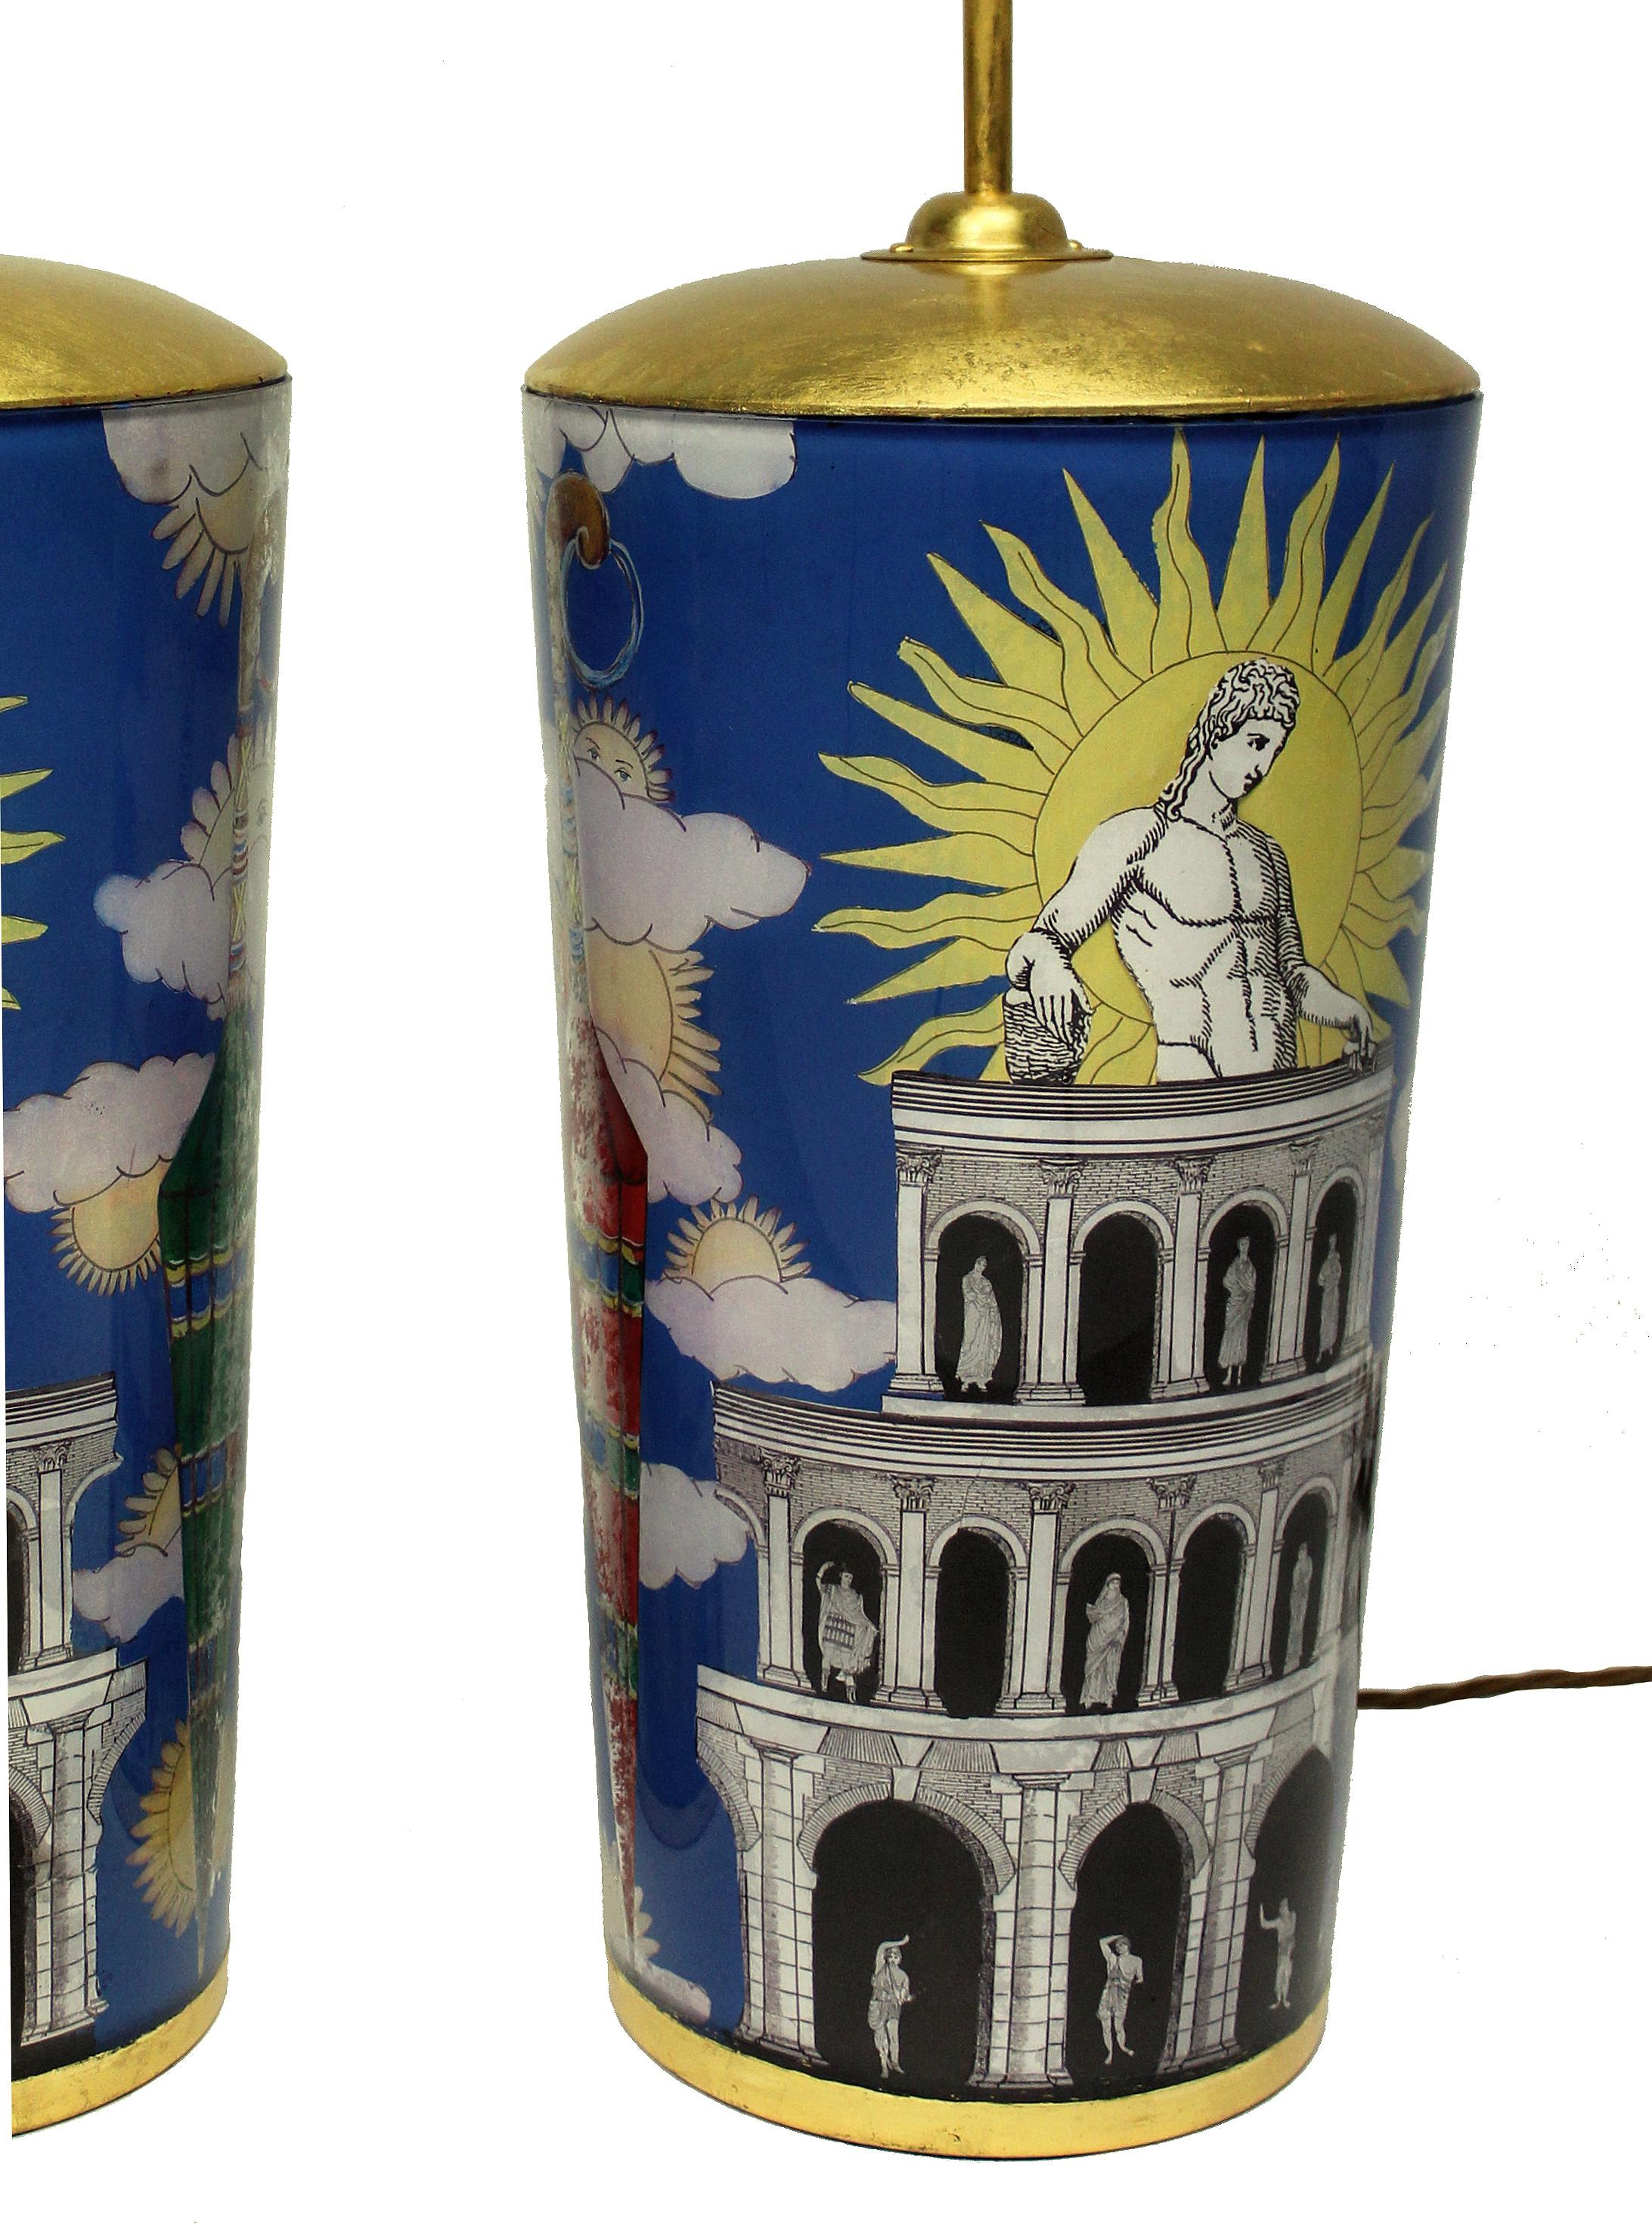 A pair of large hand painted églomisé glass table lamps inspired by Fornasetti. These lamps have been commissioned by Ebury trading and are limited to this pair only. The lamps are inspired by the 1950s designs of Pietro Fornasetti. They have wooden